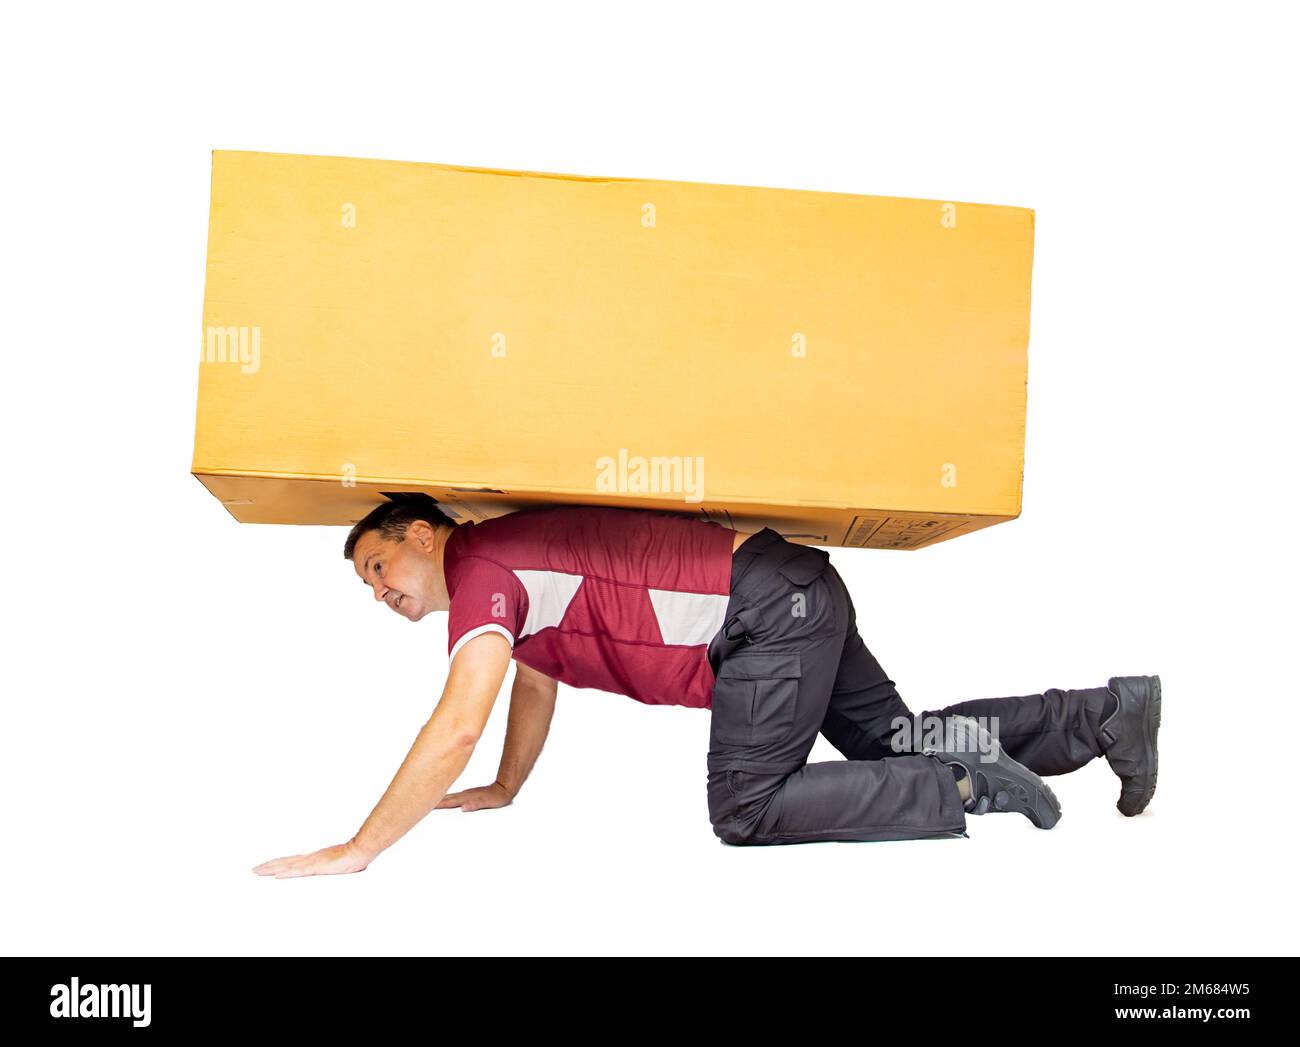 A man carries a big package, isolated on a white background. Stock Photo